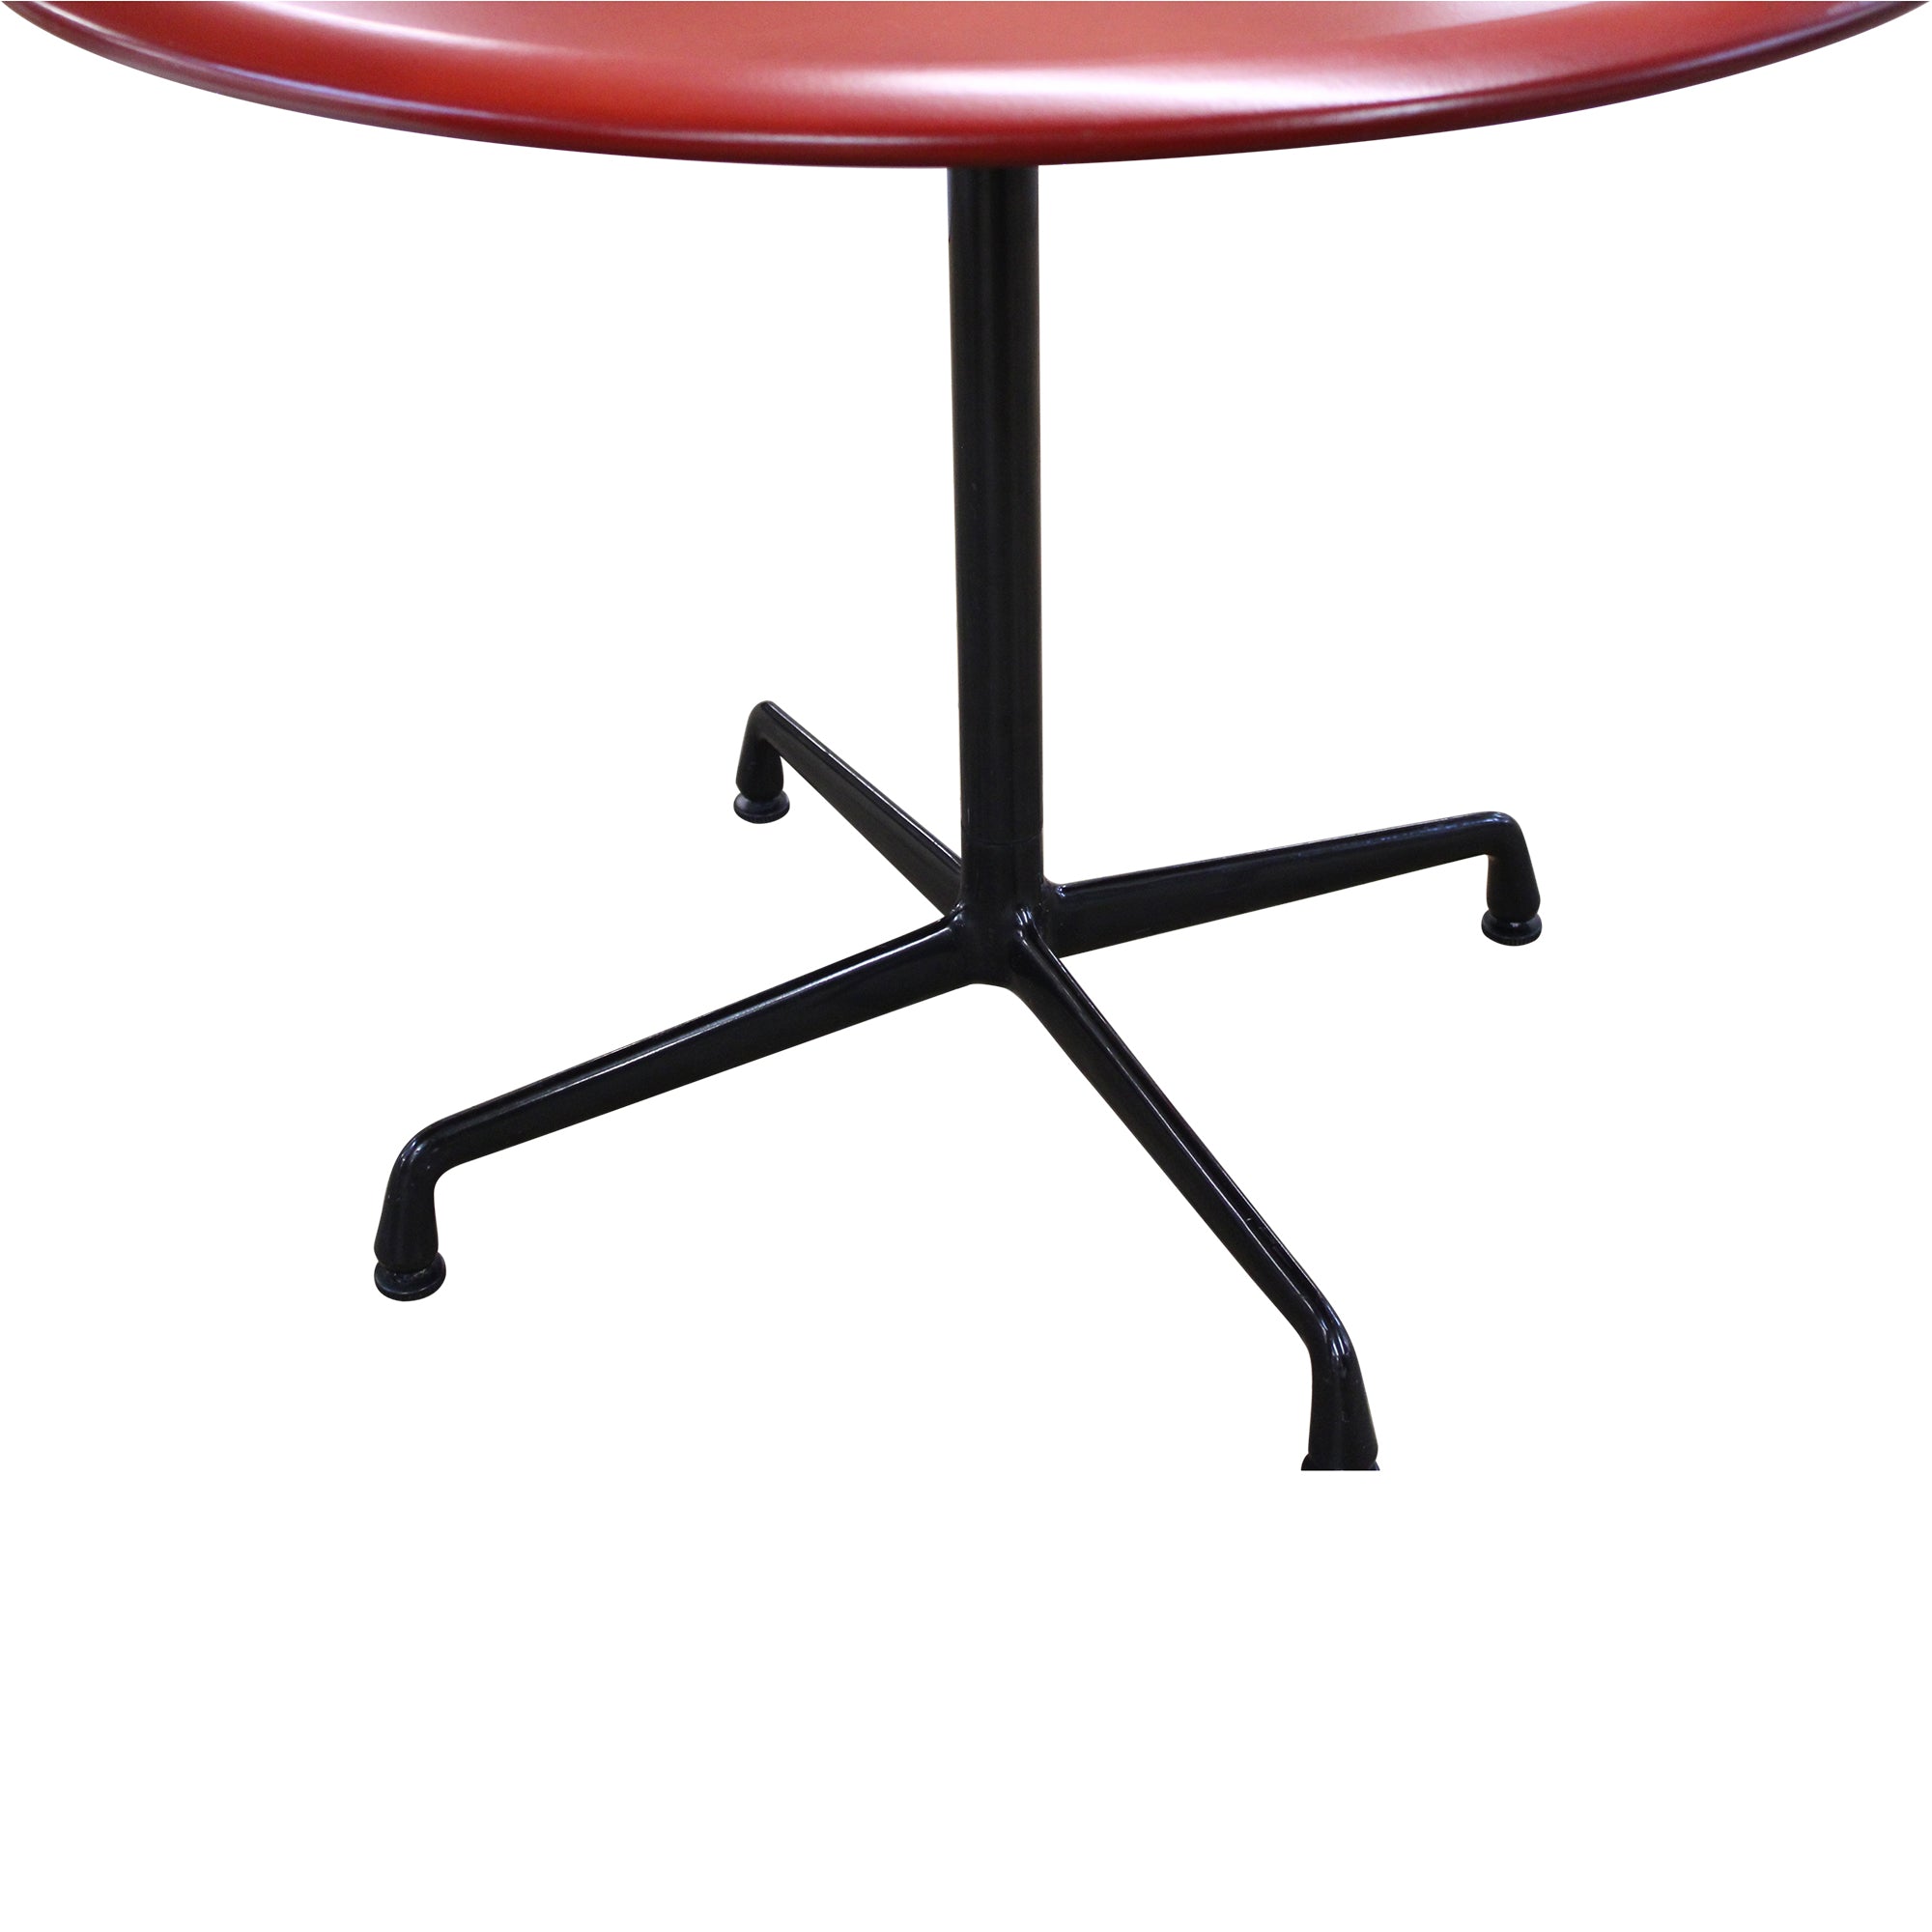 Herman Miller Eames Round Table - Red - Preowned